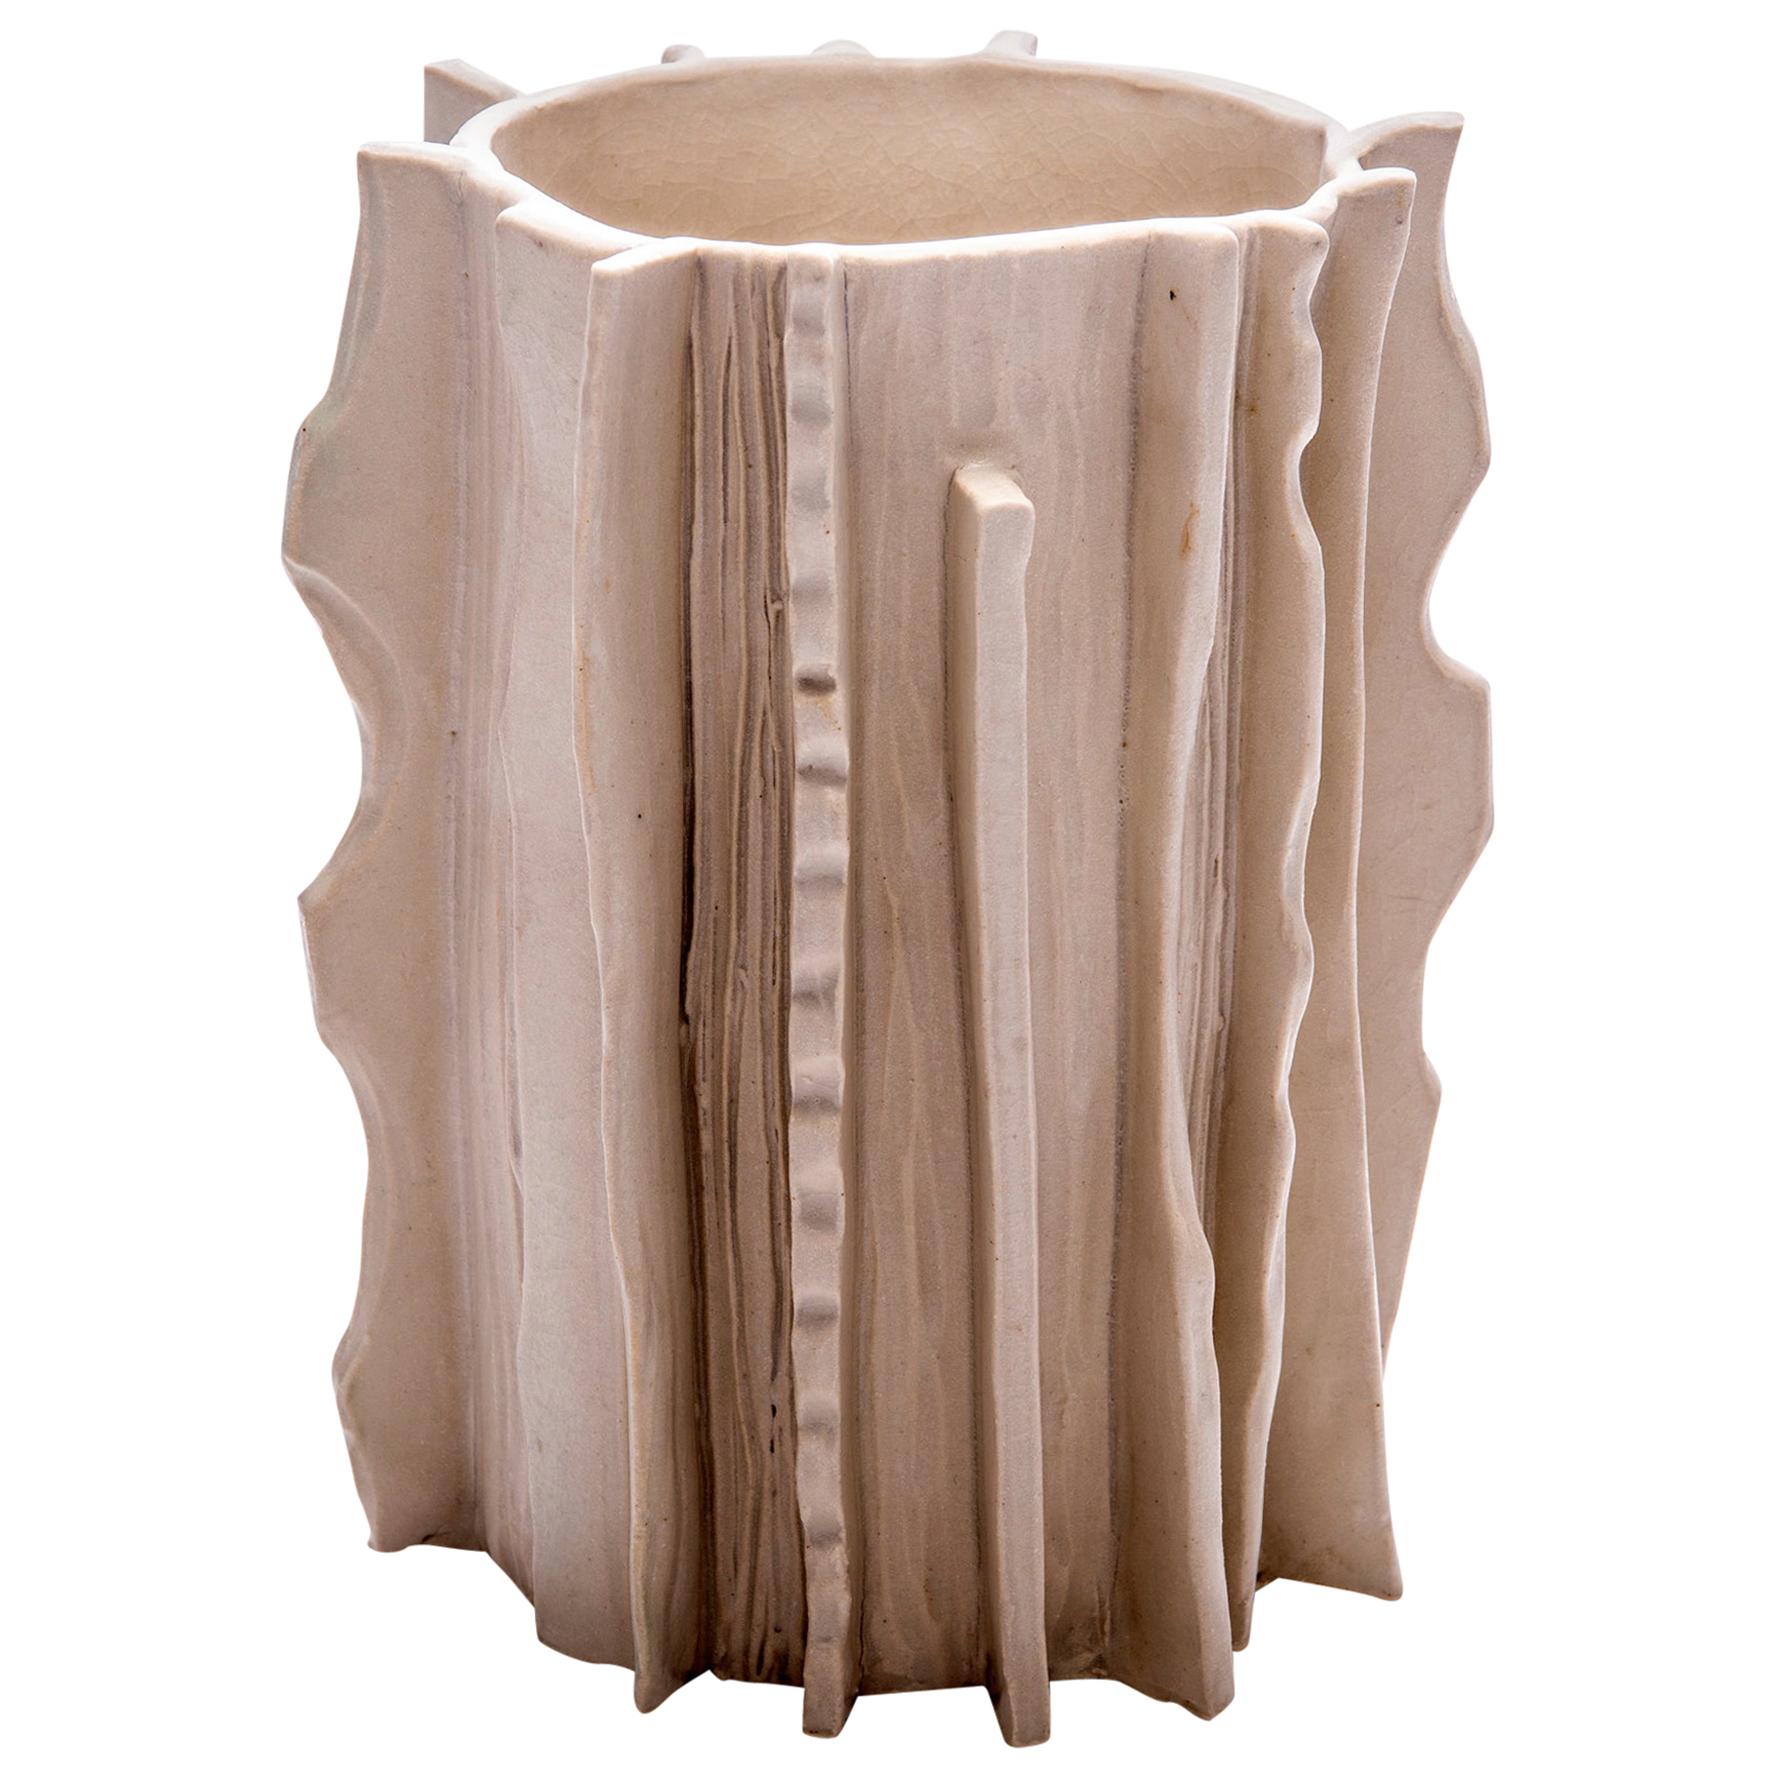 Marcello Vessel in Glazed Ceramic from the Moderno Collection by Trish DeMasi For Sale